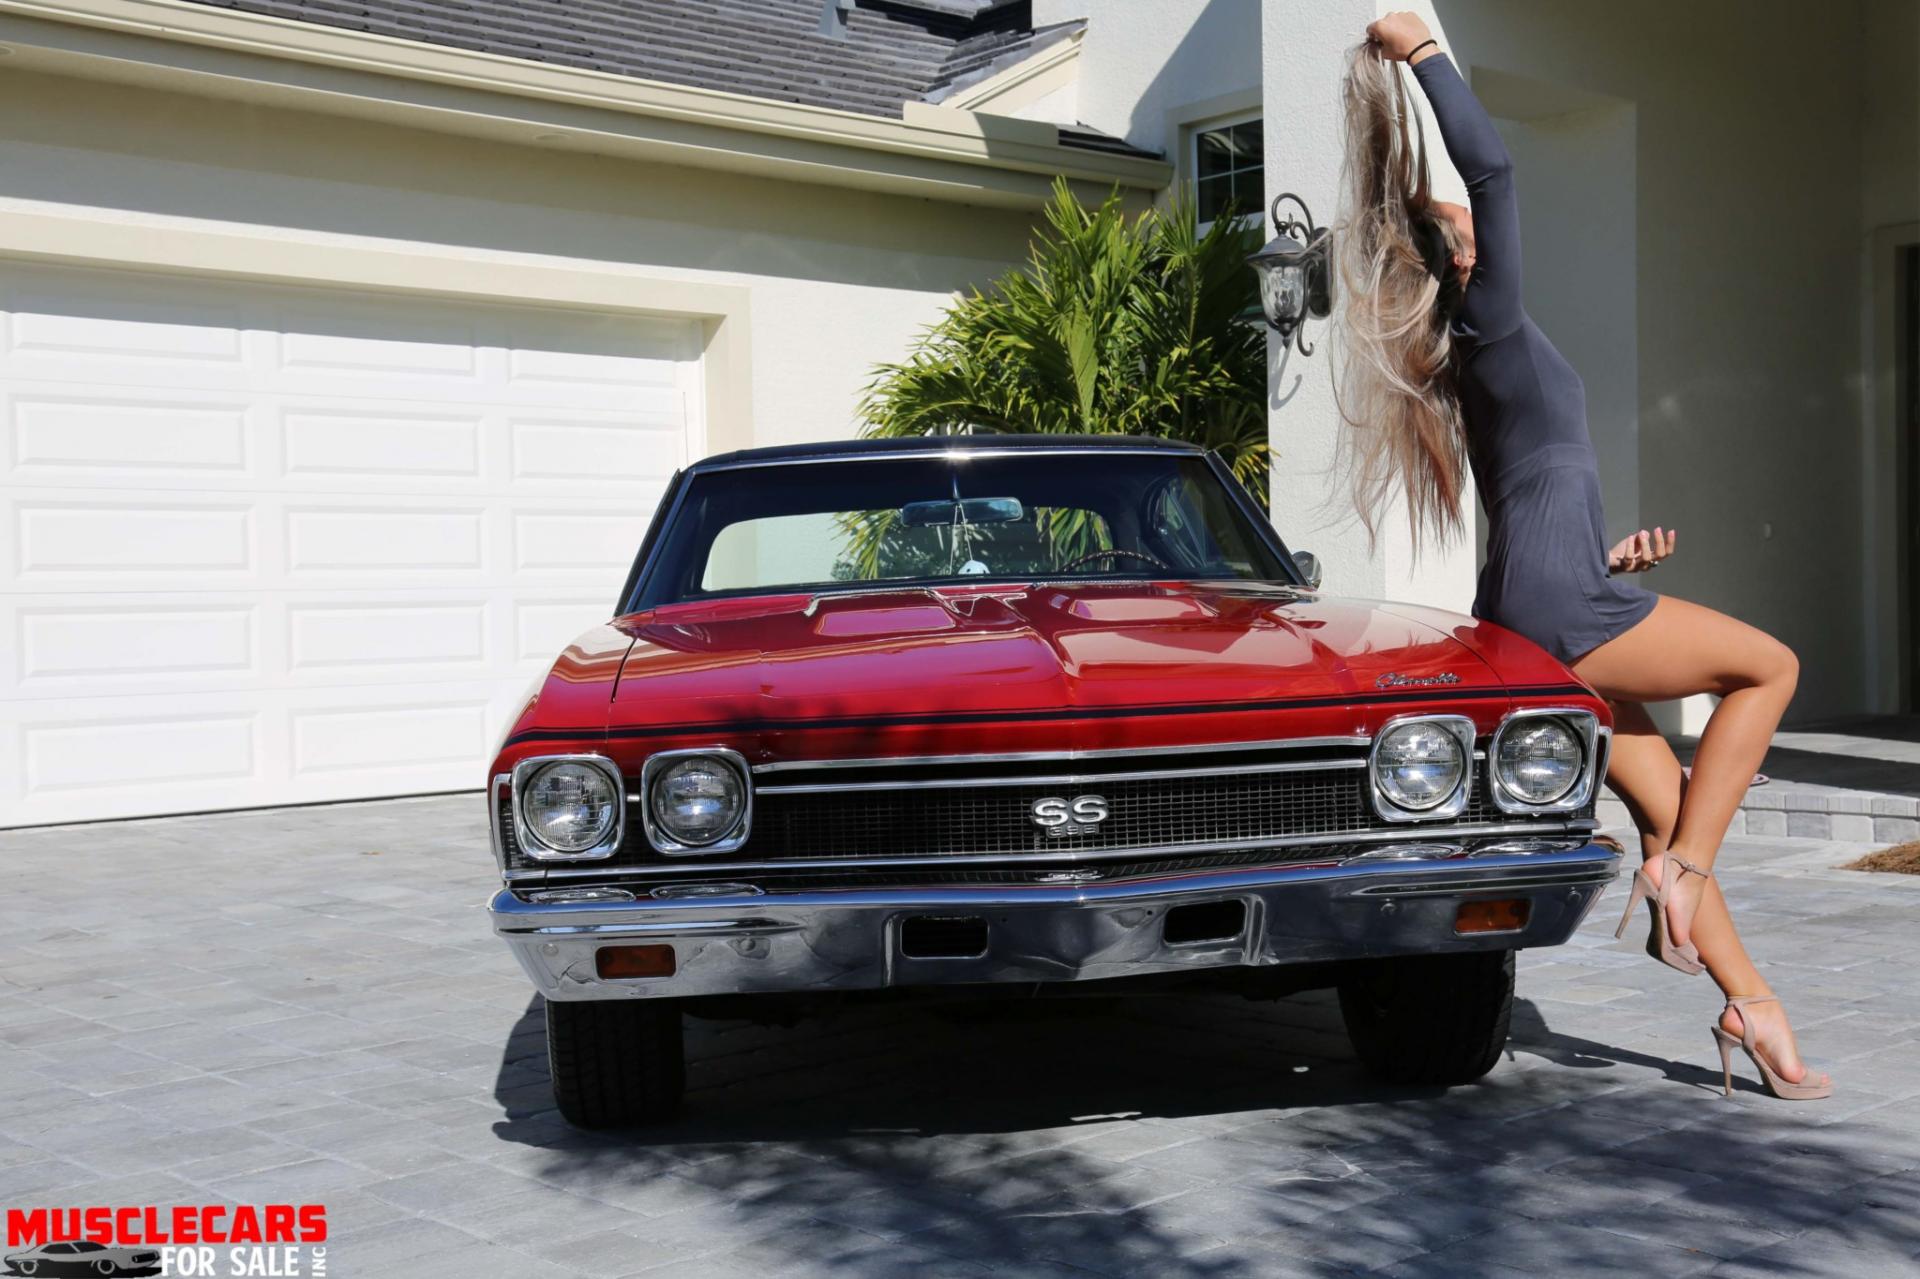 RED CHEVELLE AMAZİNG